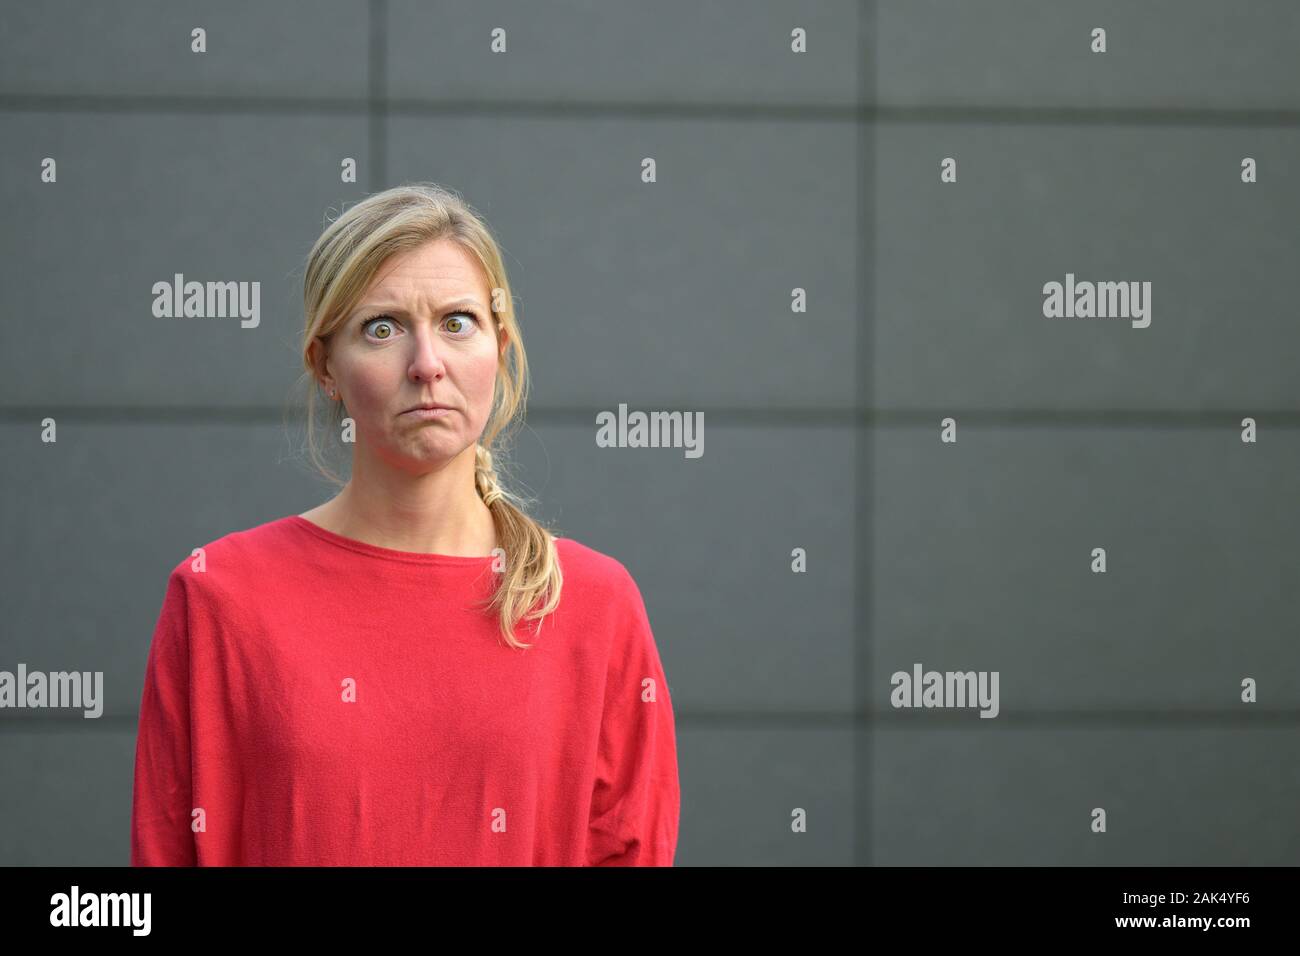 Angry woman staring wide eyed at the camera with a fierce grumpy expression against a grey wall Stock Photo